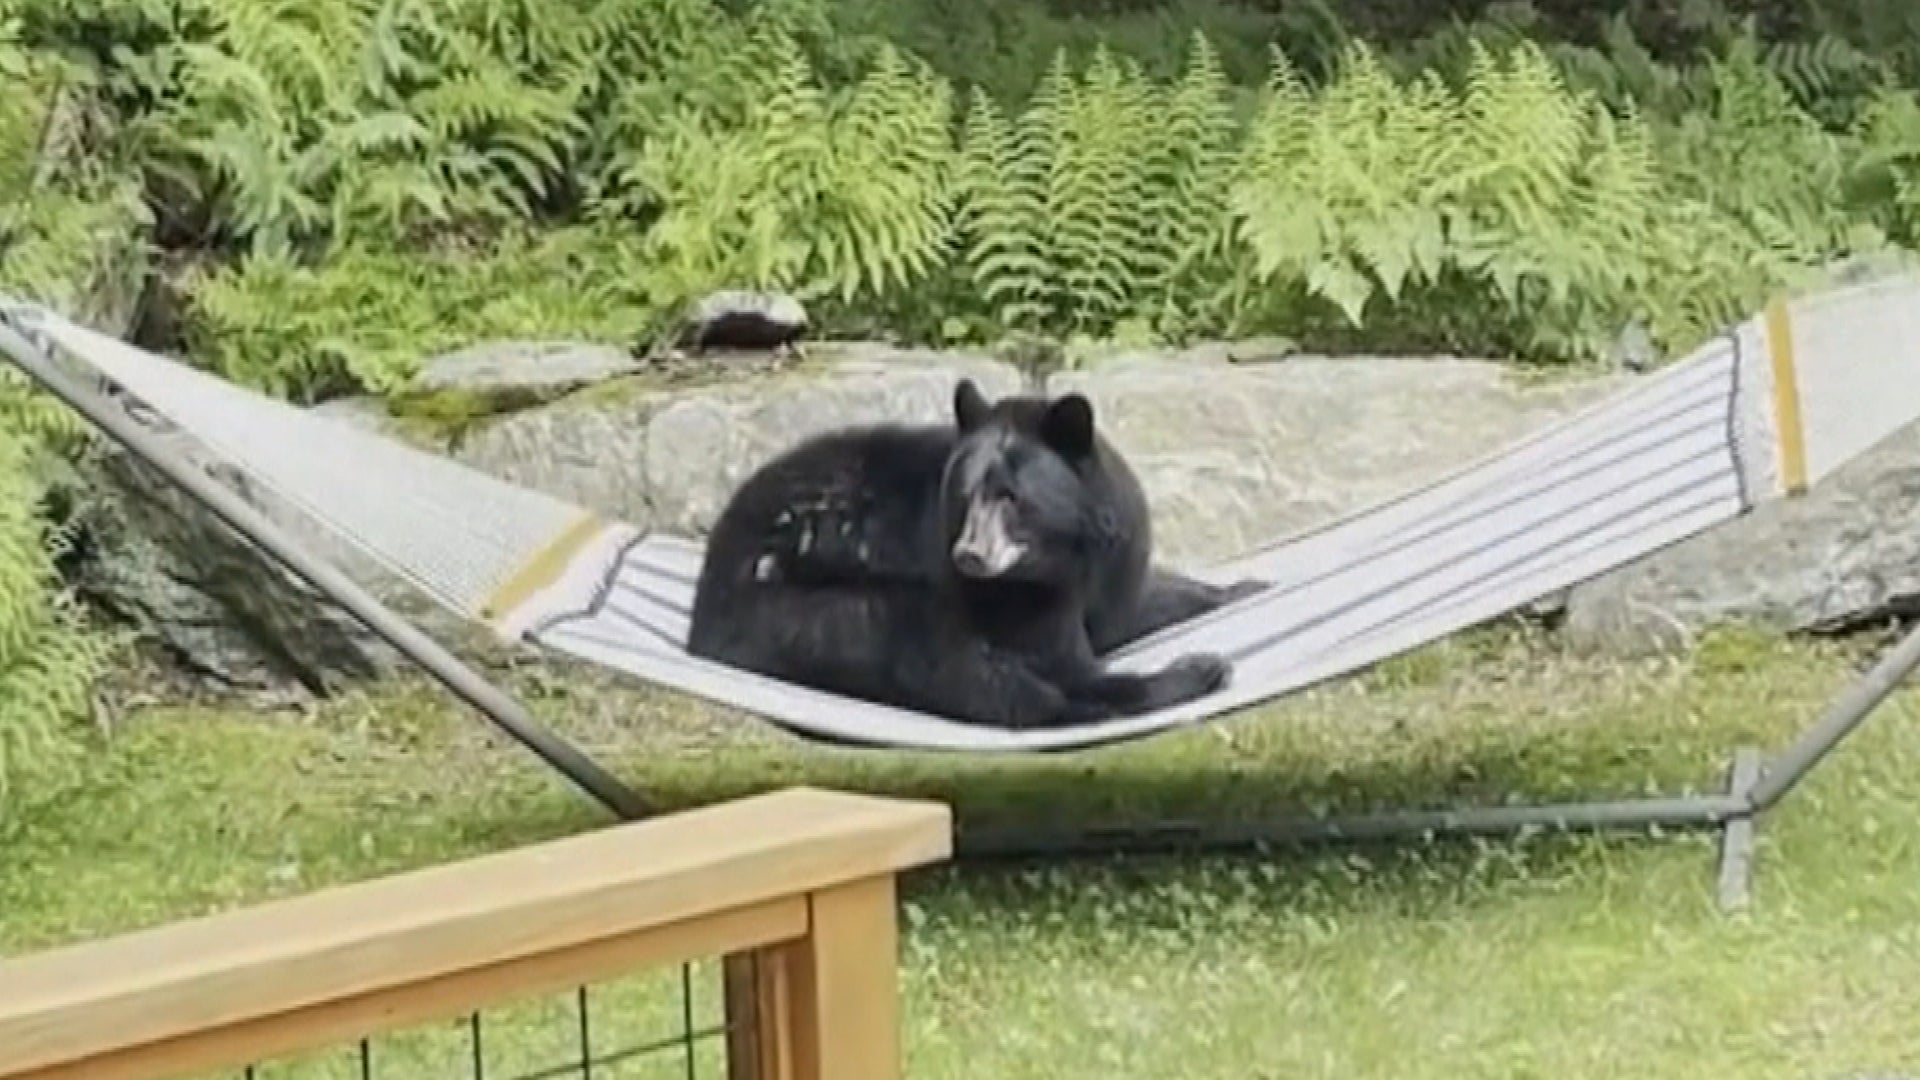 Bear Gets Off Homeowner's Hammock After Being Cheekily Scolded